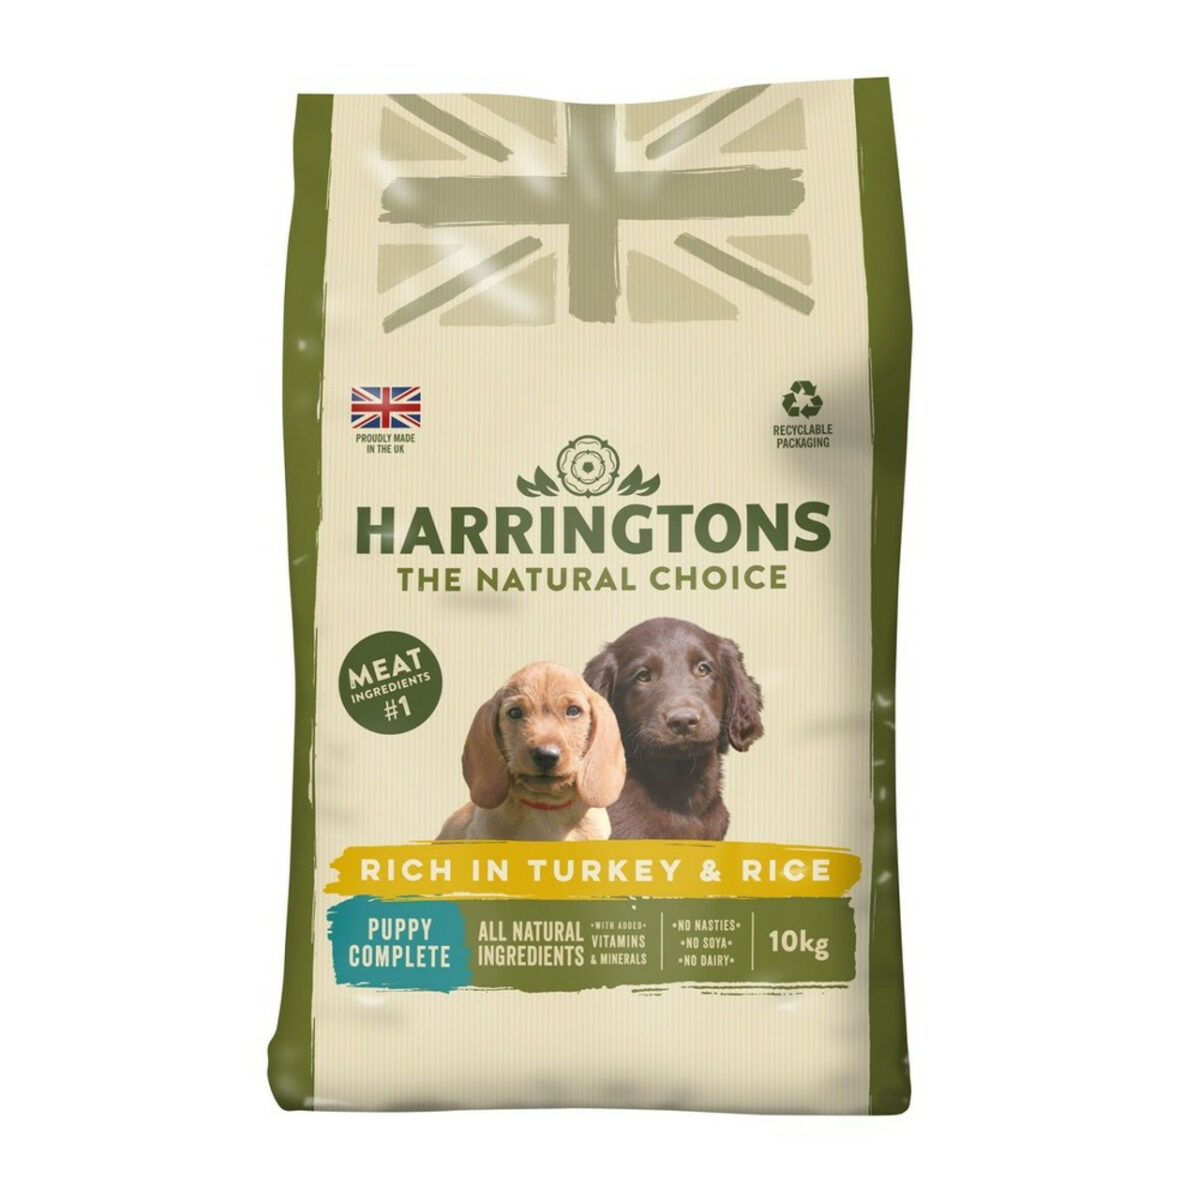 Harringtons Puppy Complete Dry Dog Food with Turkey & Rice 10kg from Catdog Store